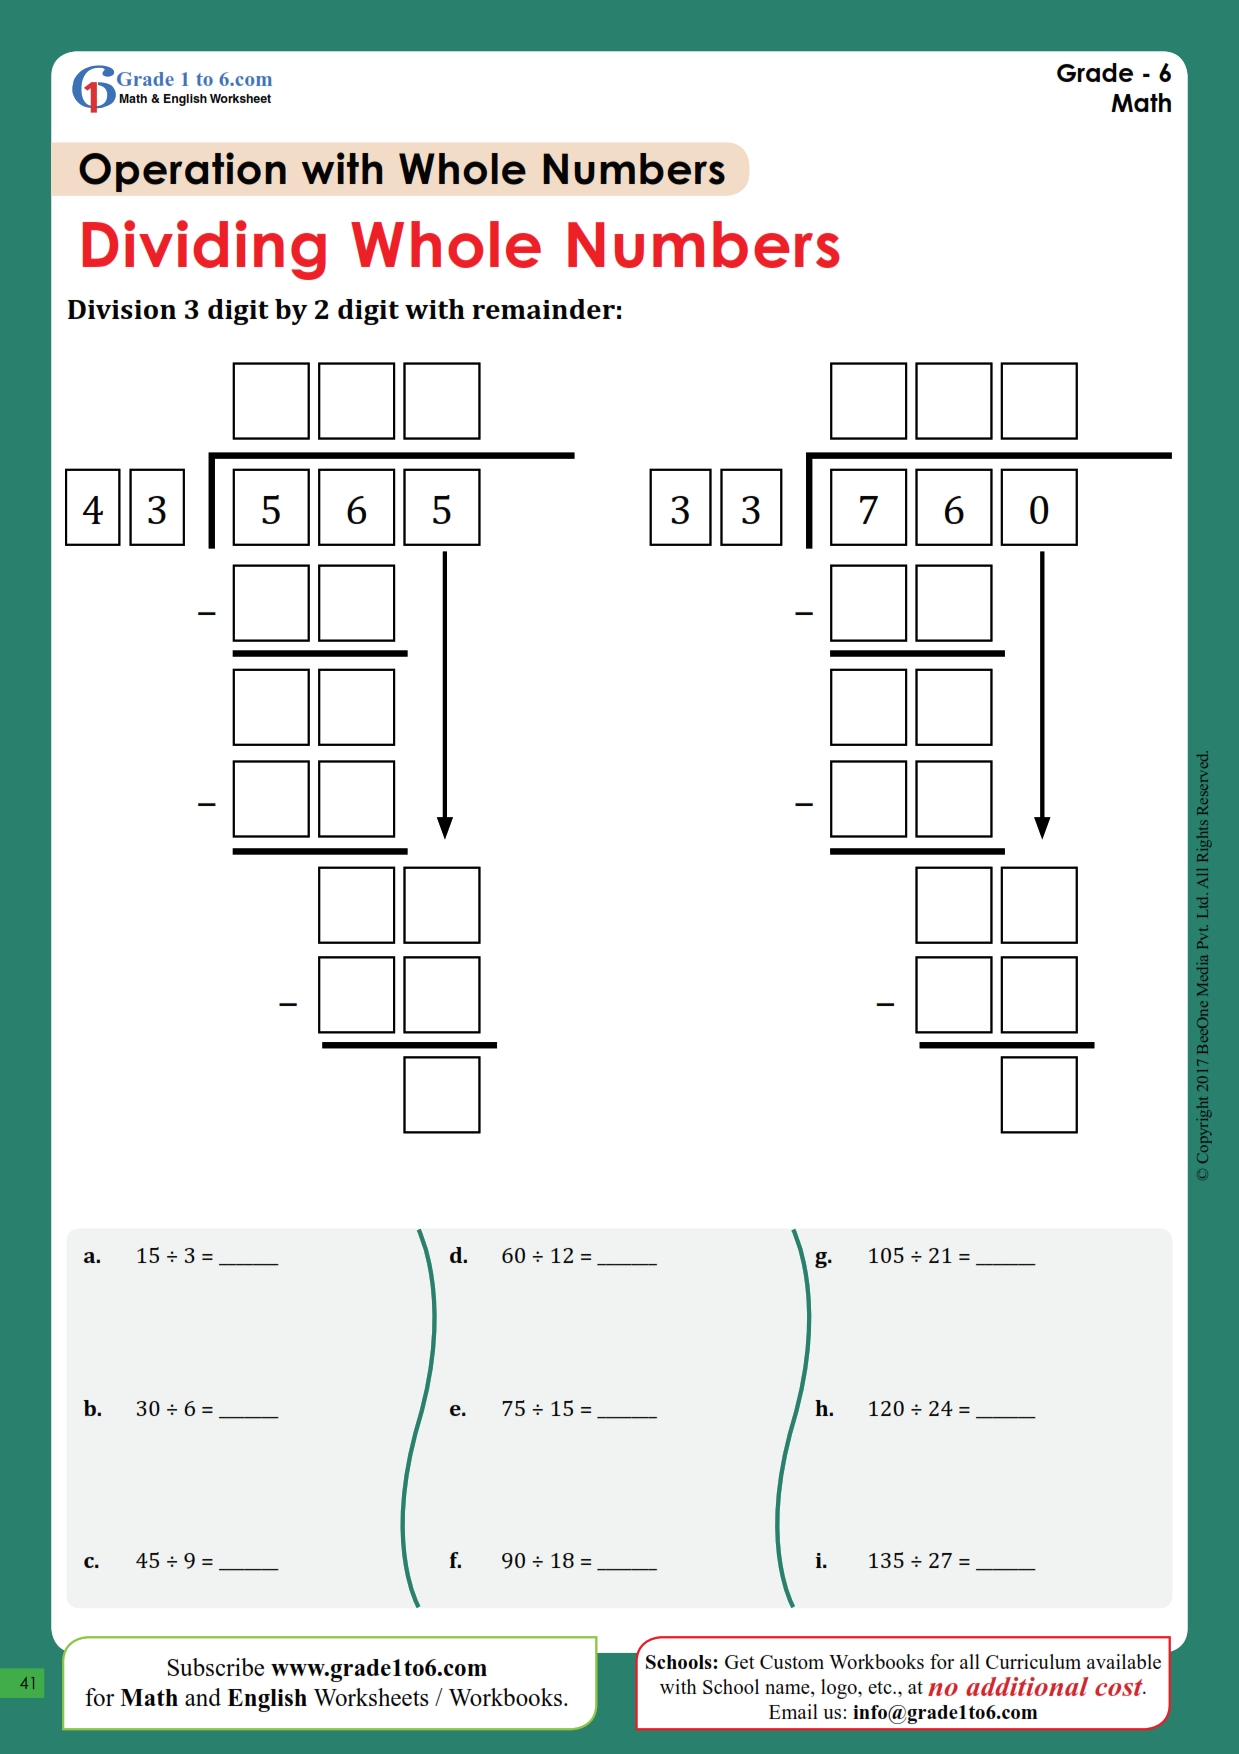 dividing-whole-numbers-worksheet-grade1to6